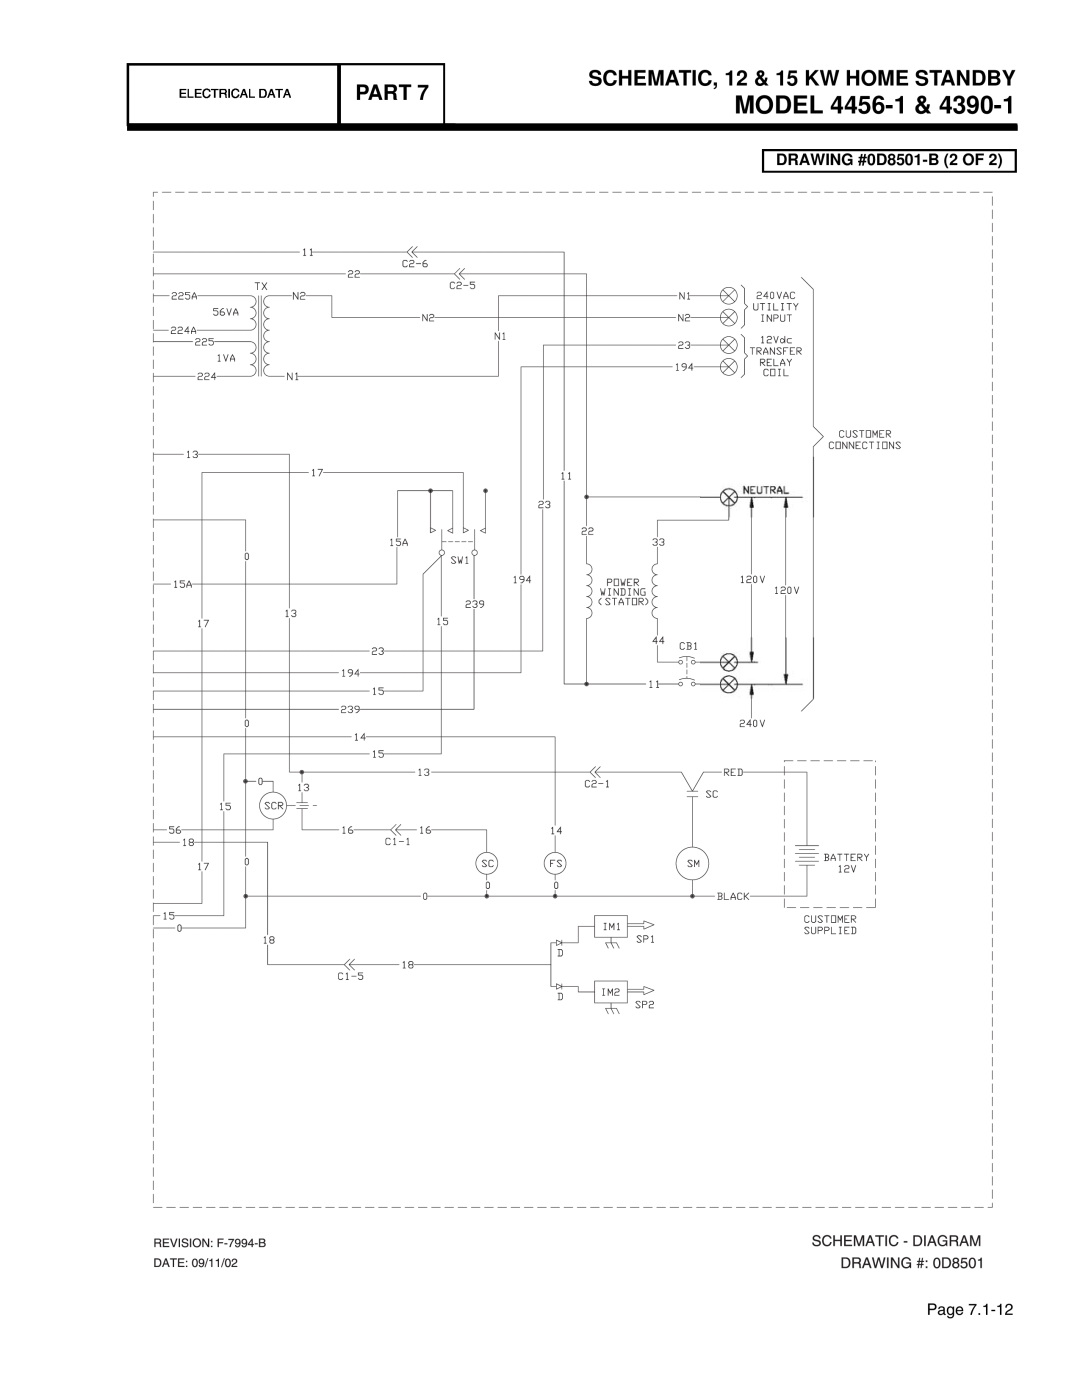 Guardian Technologies 4759 MODEL 4456-1, Part, SCHEMATIC, 12 & 15 KW HOME STANDBY, DRAWING #0D8501-B 2 OF, Electrical Data 